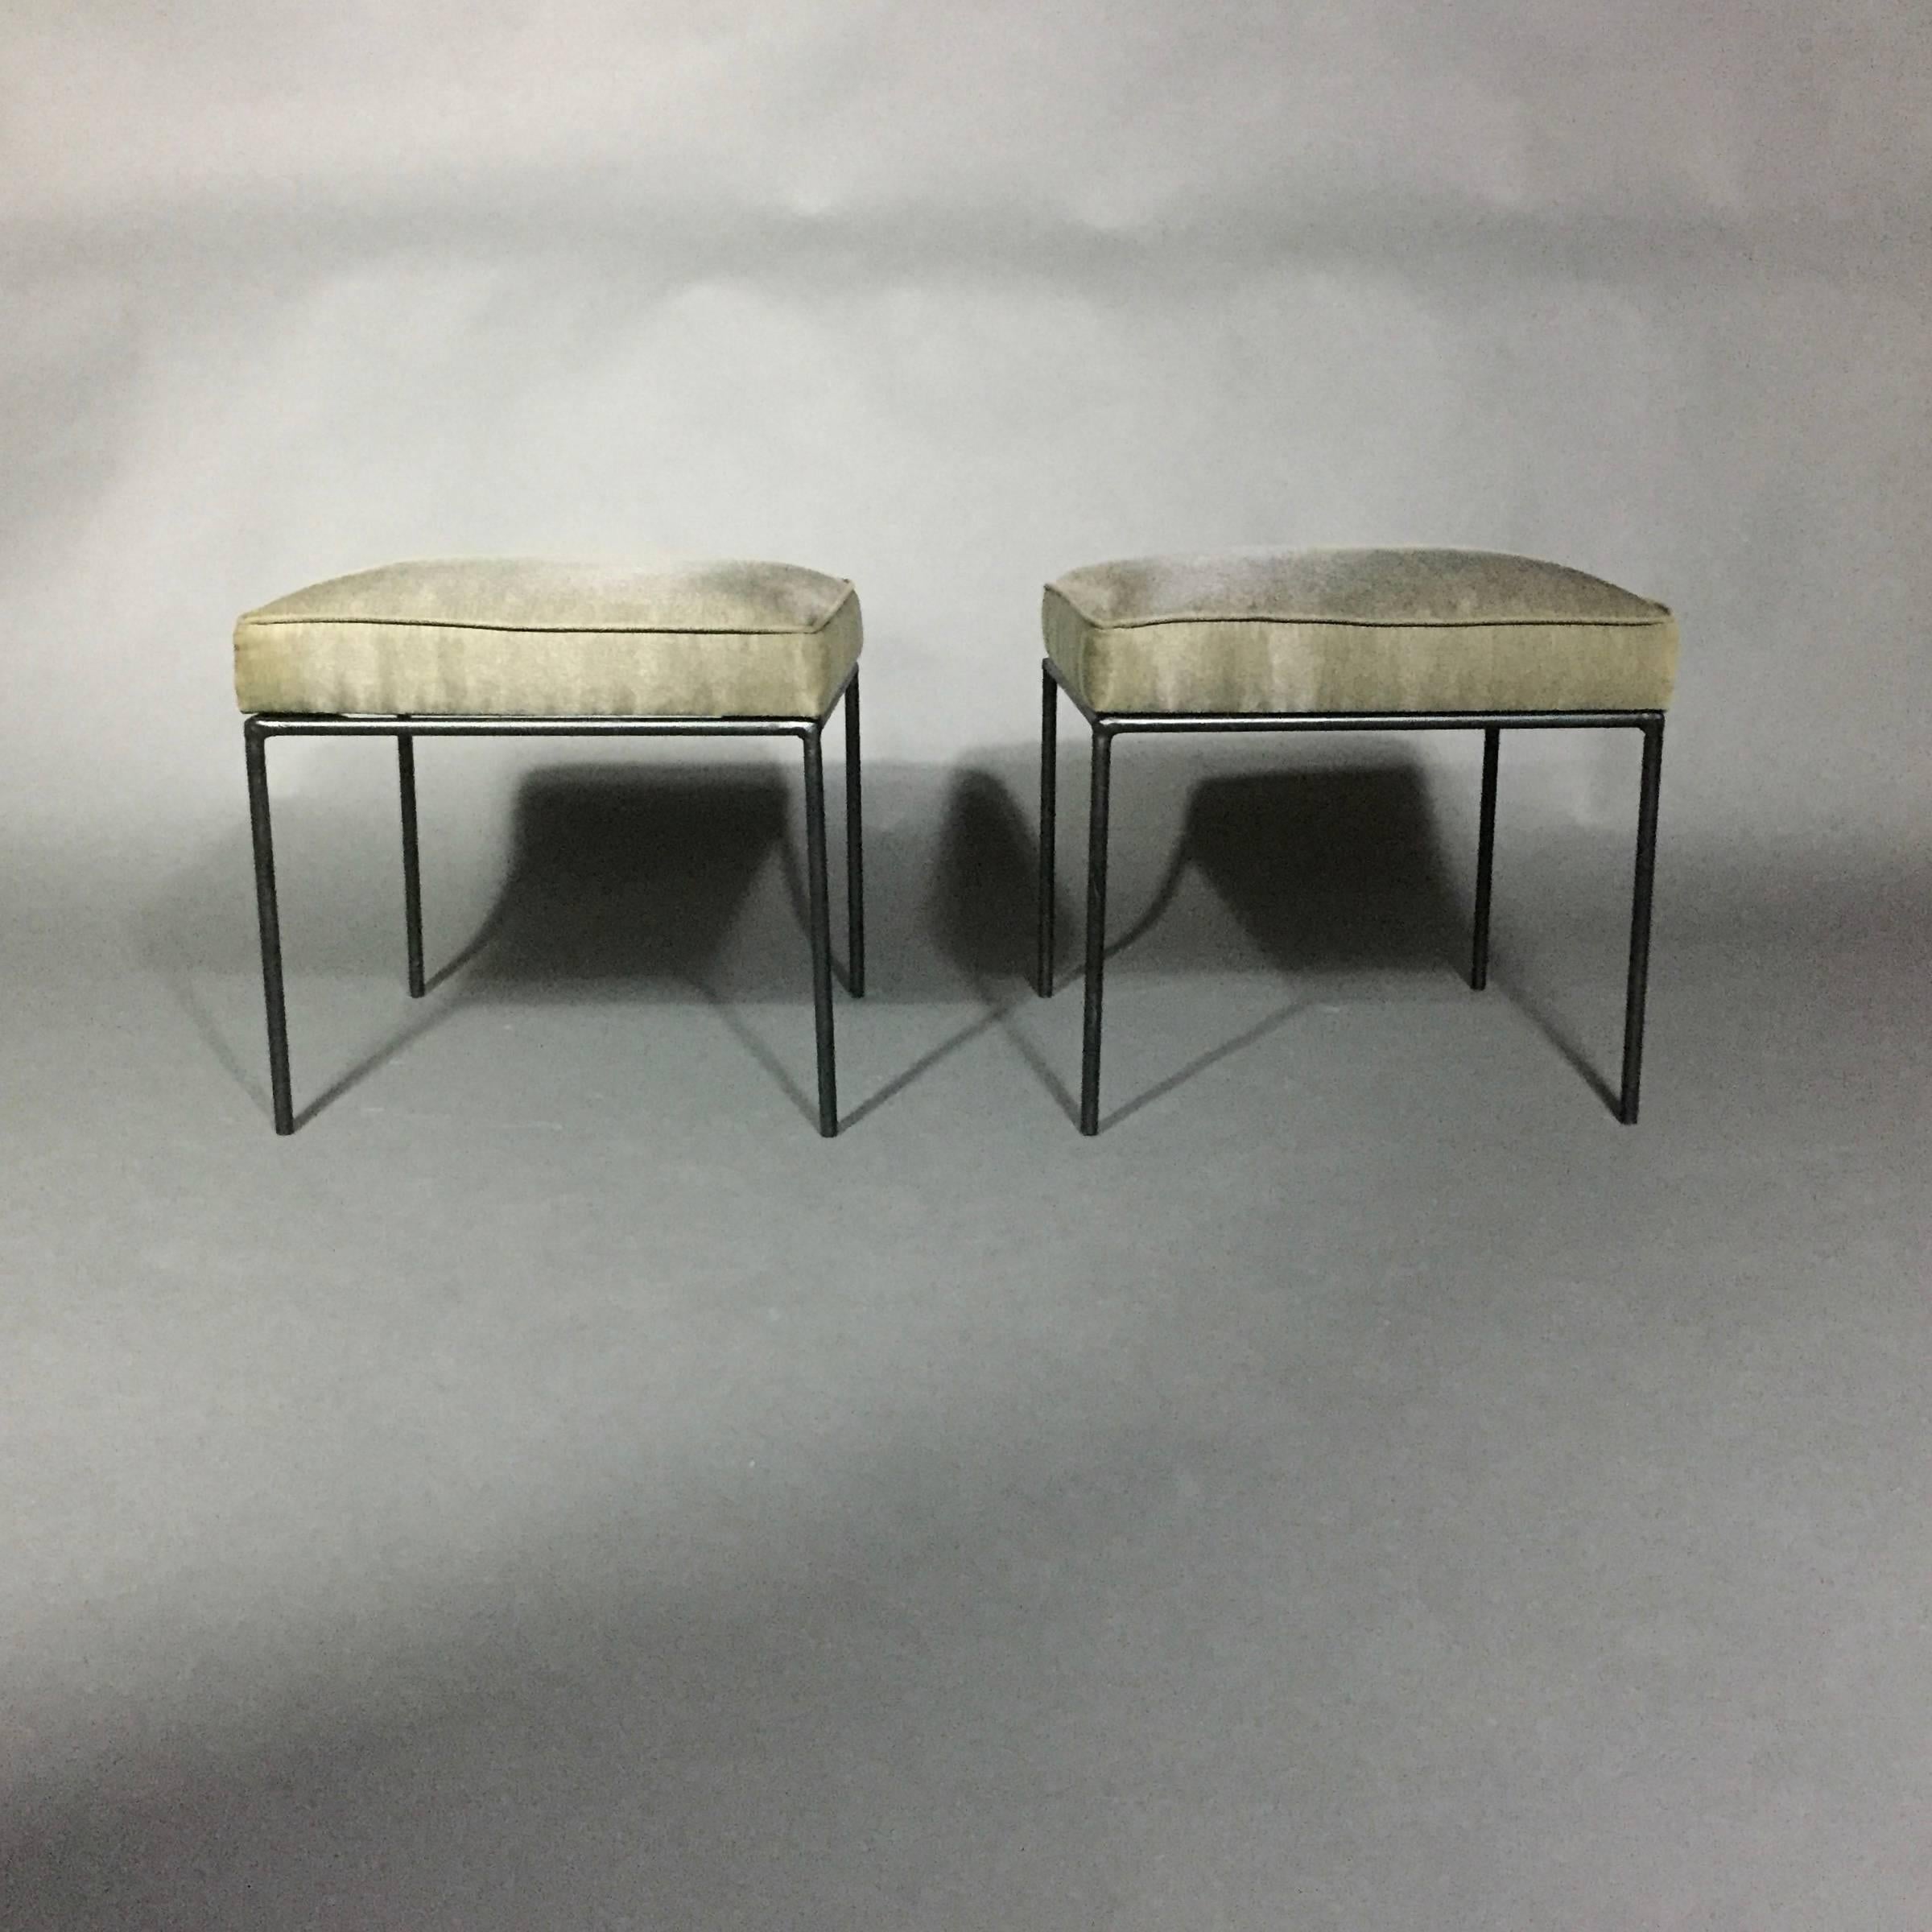 Simple and elegant wrought iron frames are Classic McCobb in this pair of 1950s benches 15 3/4